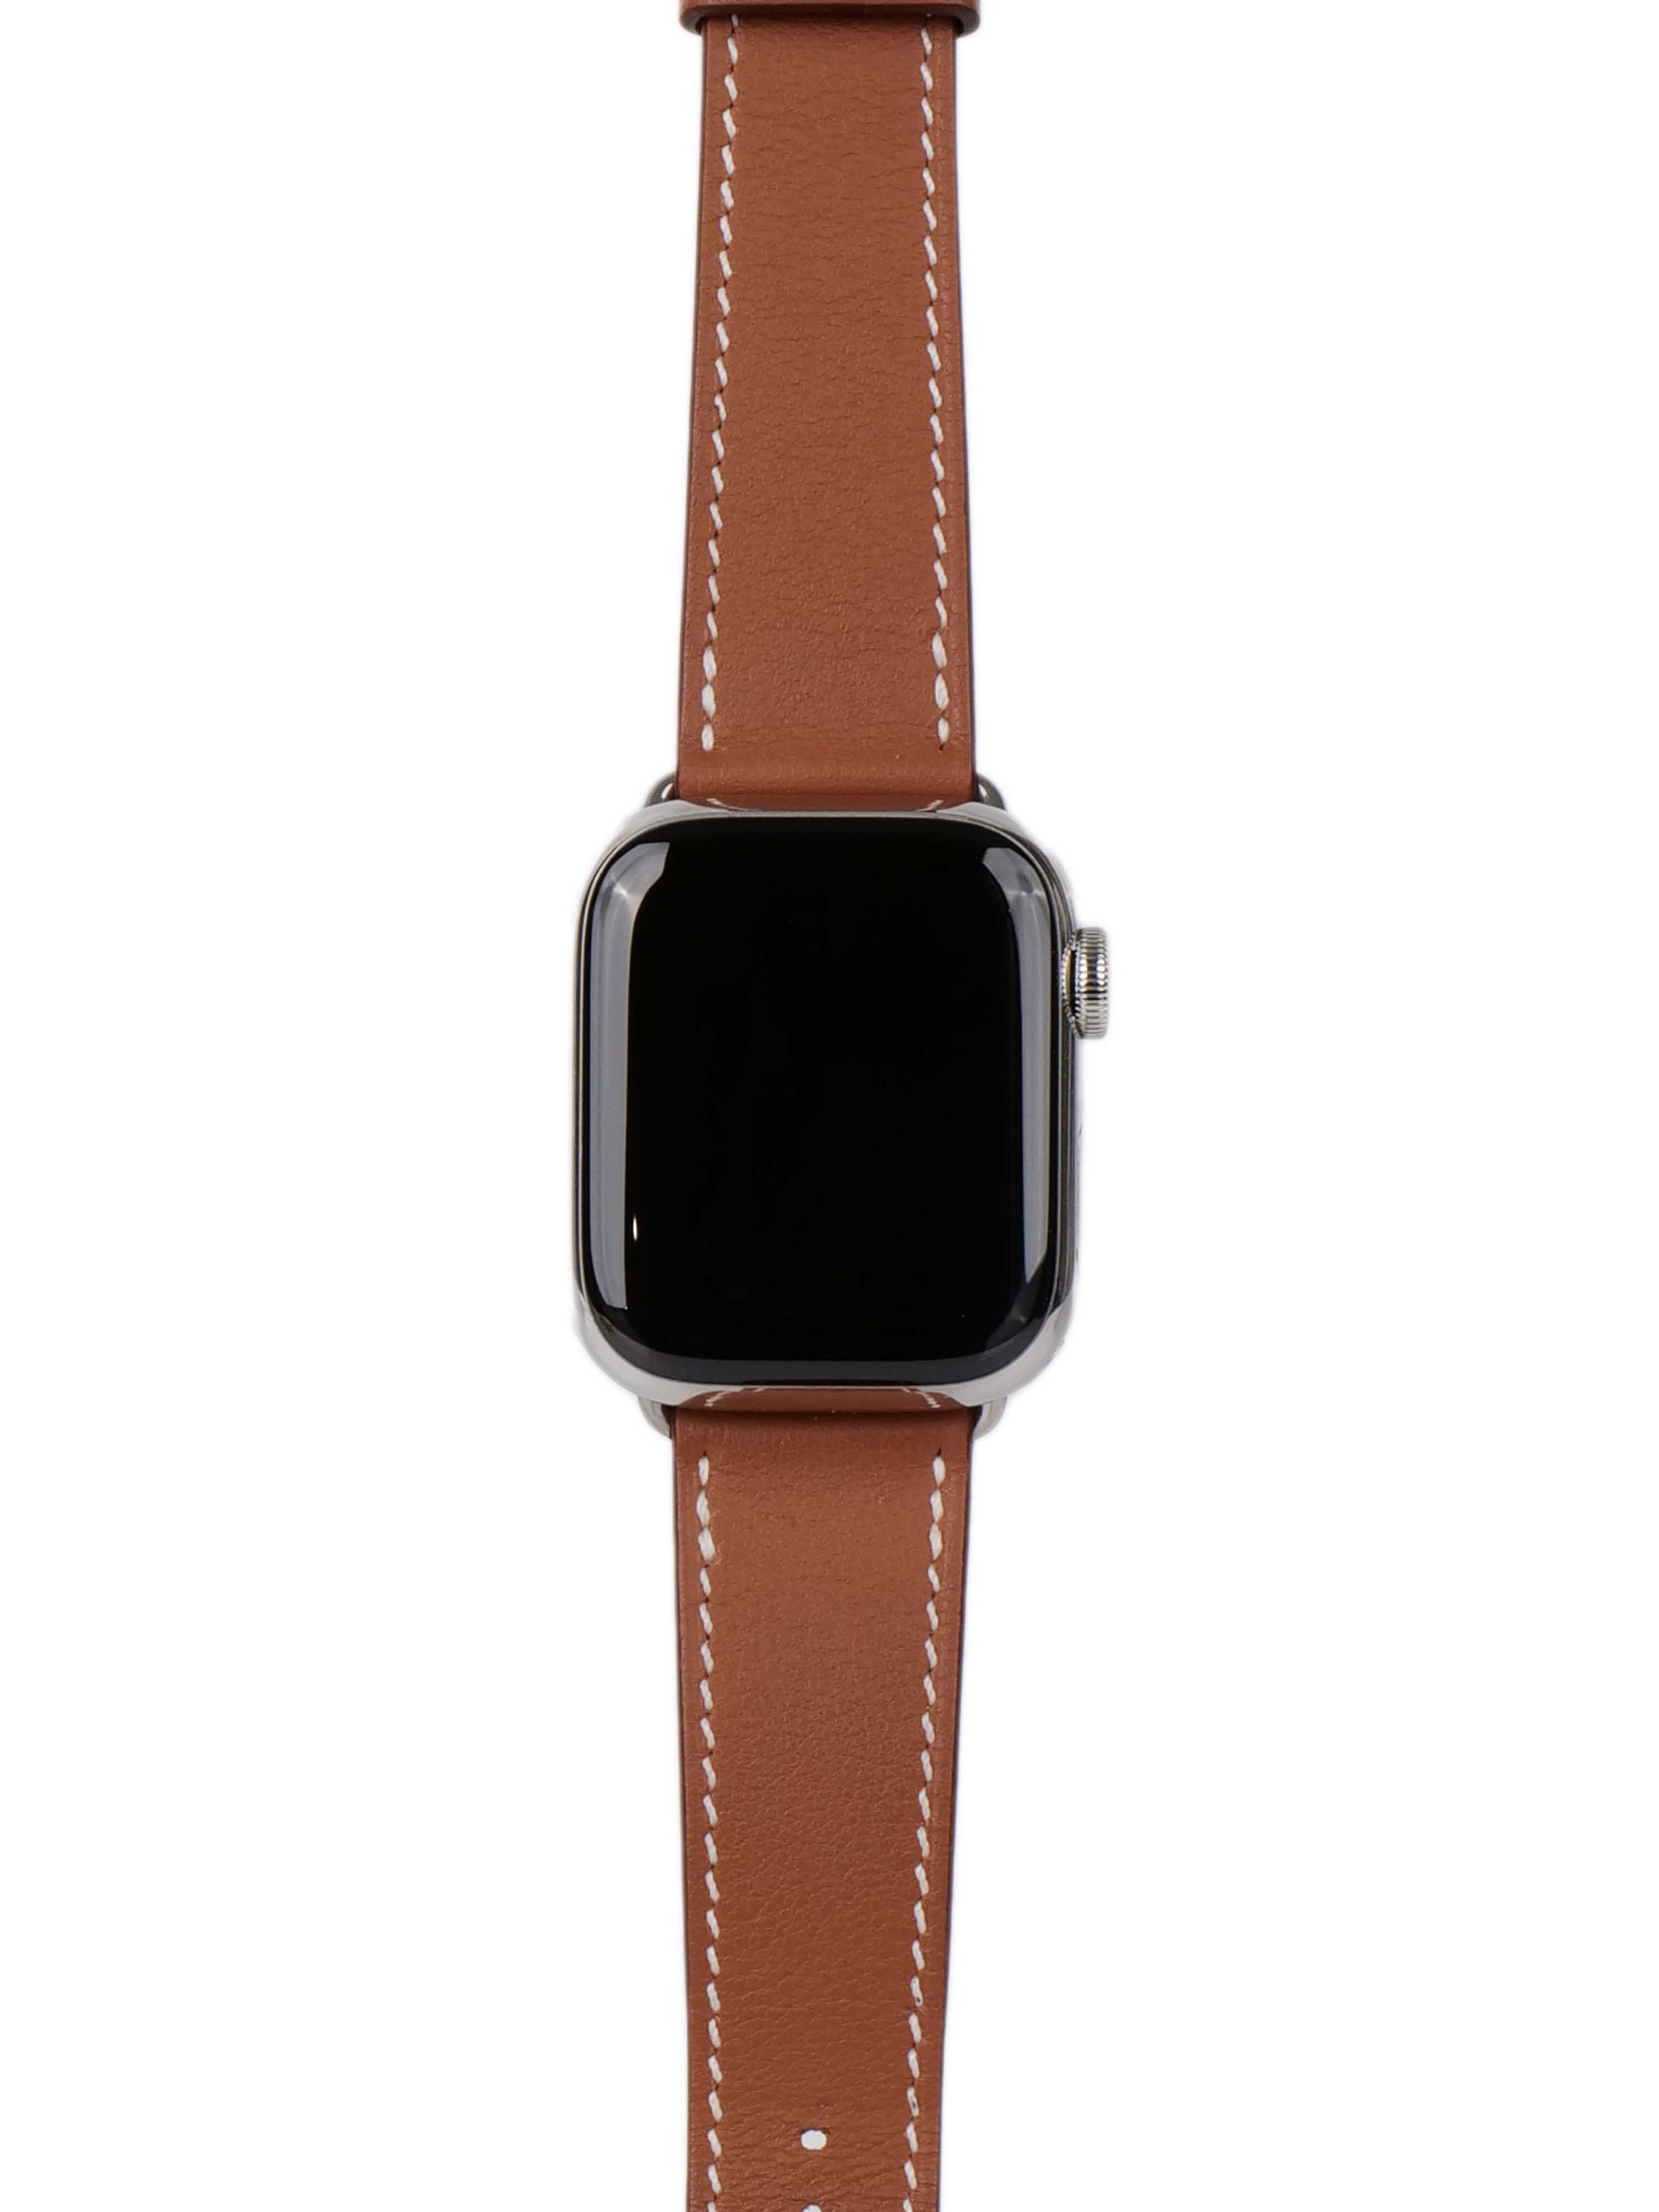 Hermes 9 Case & Band Apple Watch 41mm.